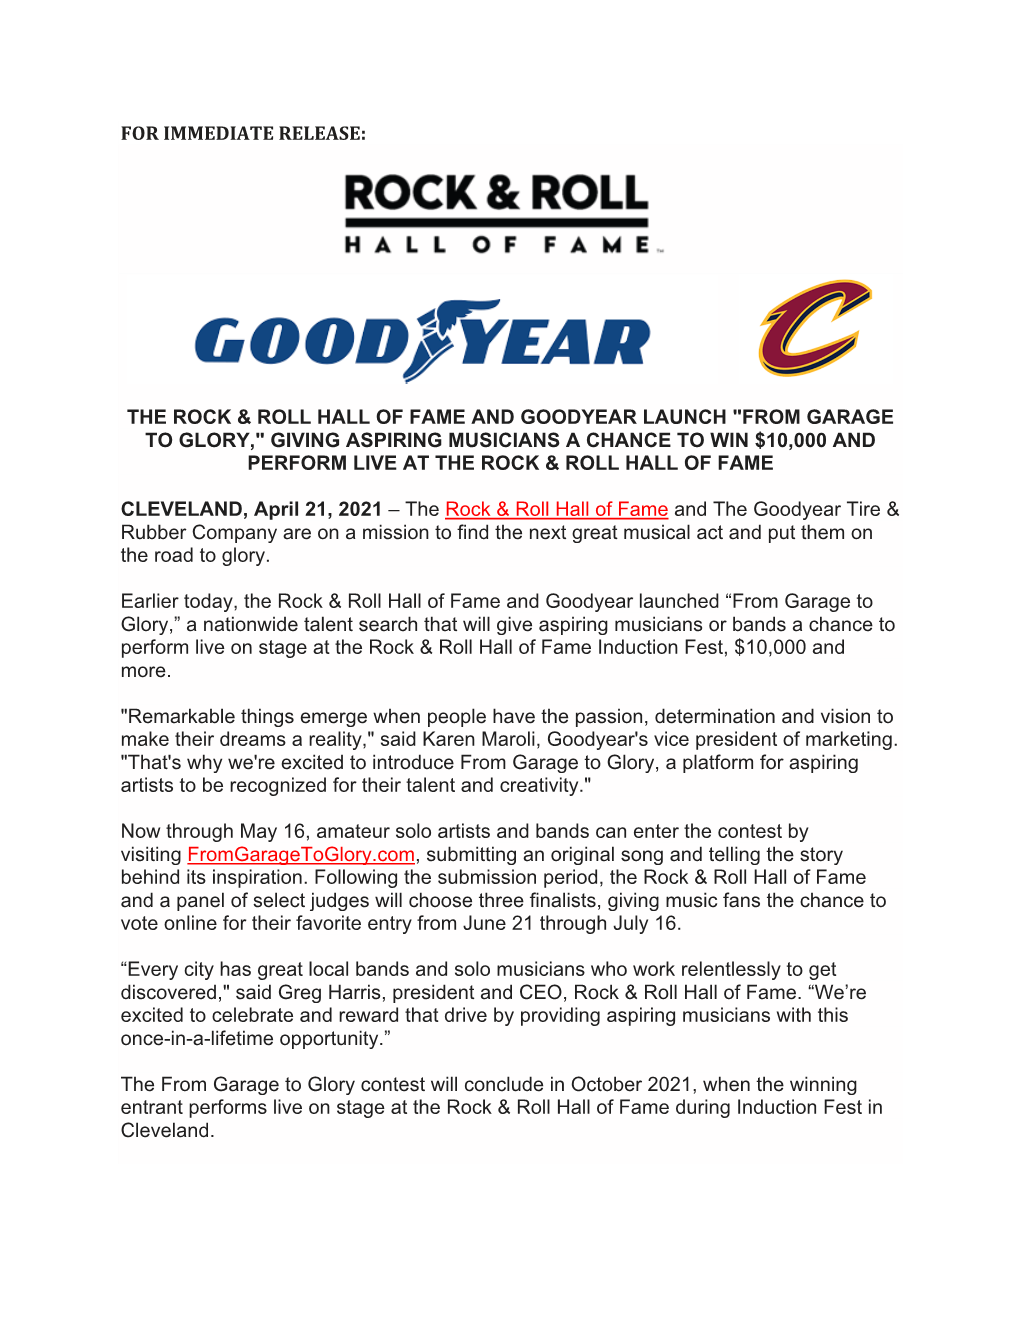 The Rock & Roll Hall of Fame and Goodyear Launch